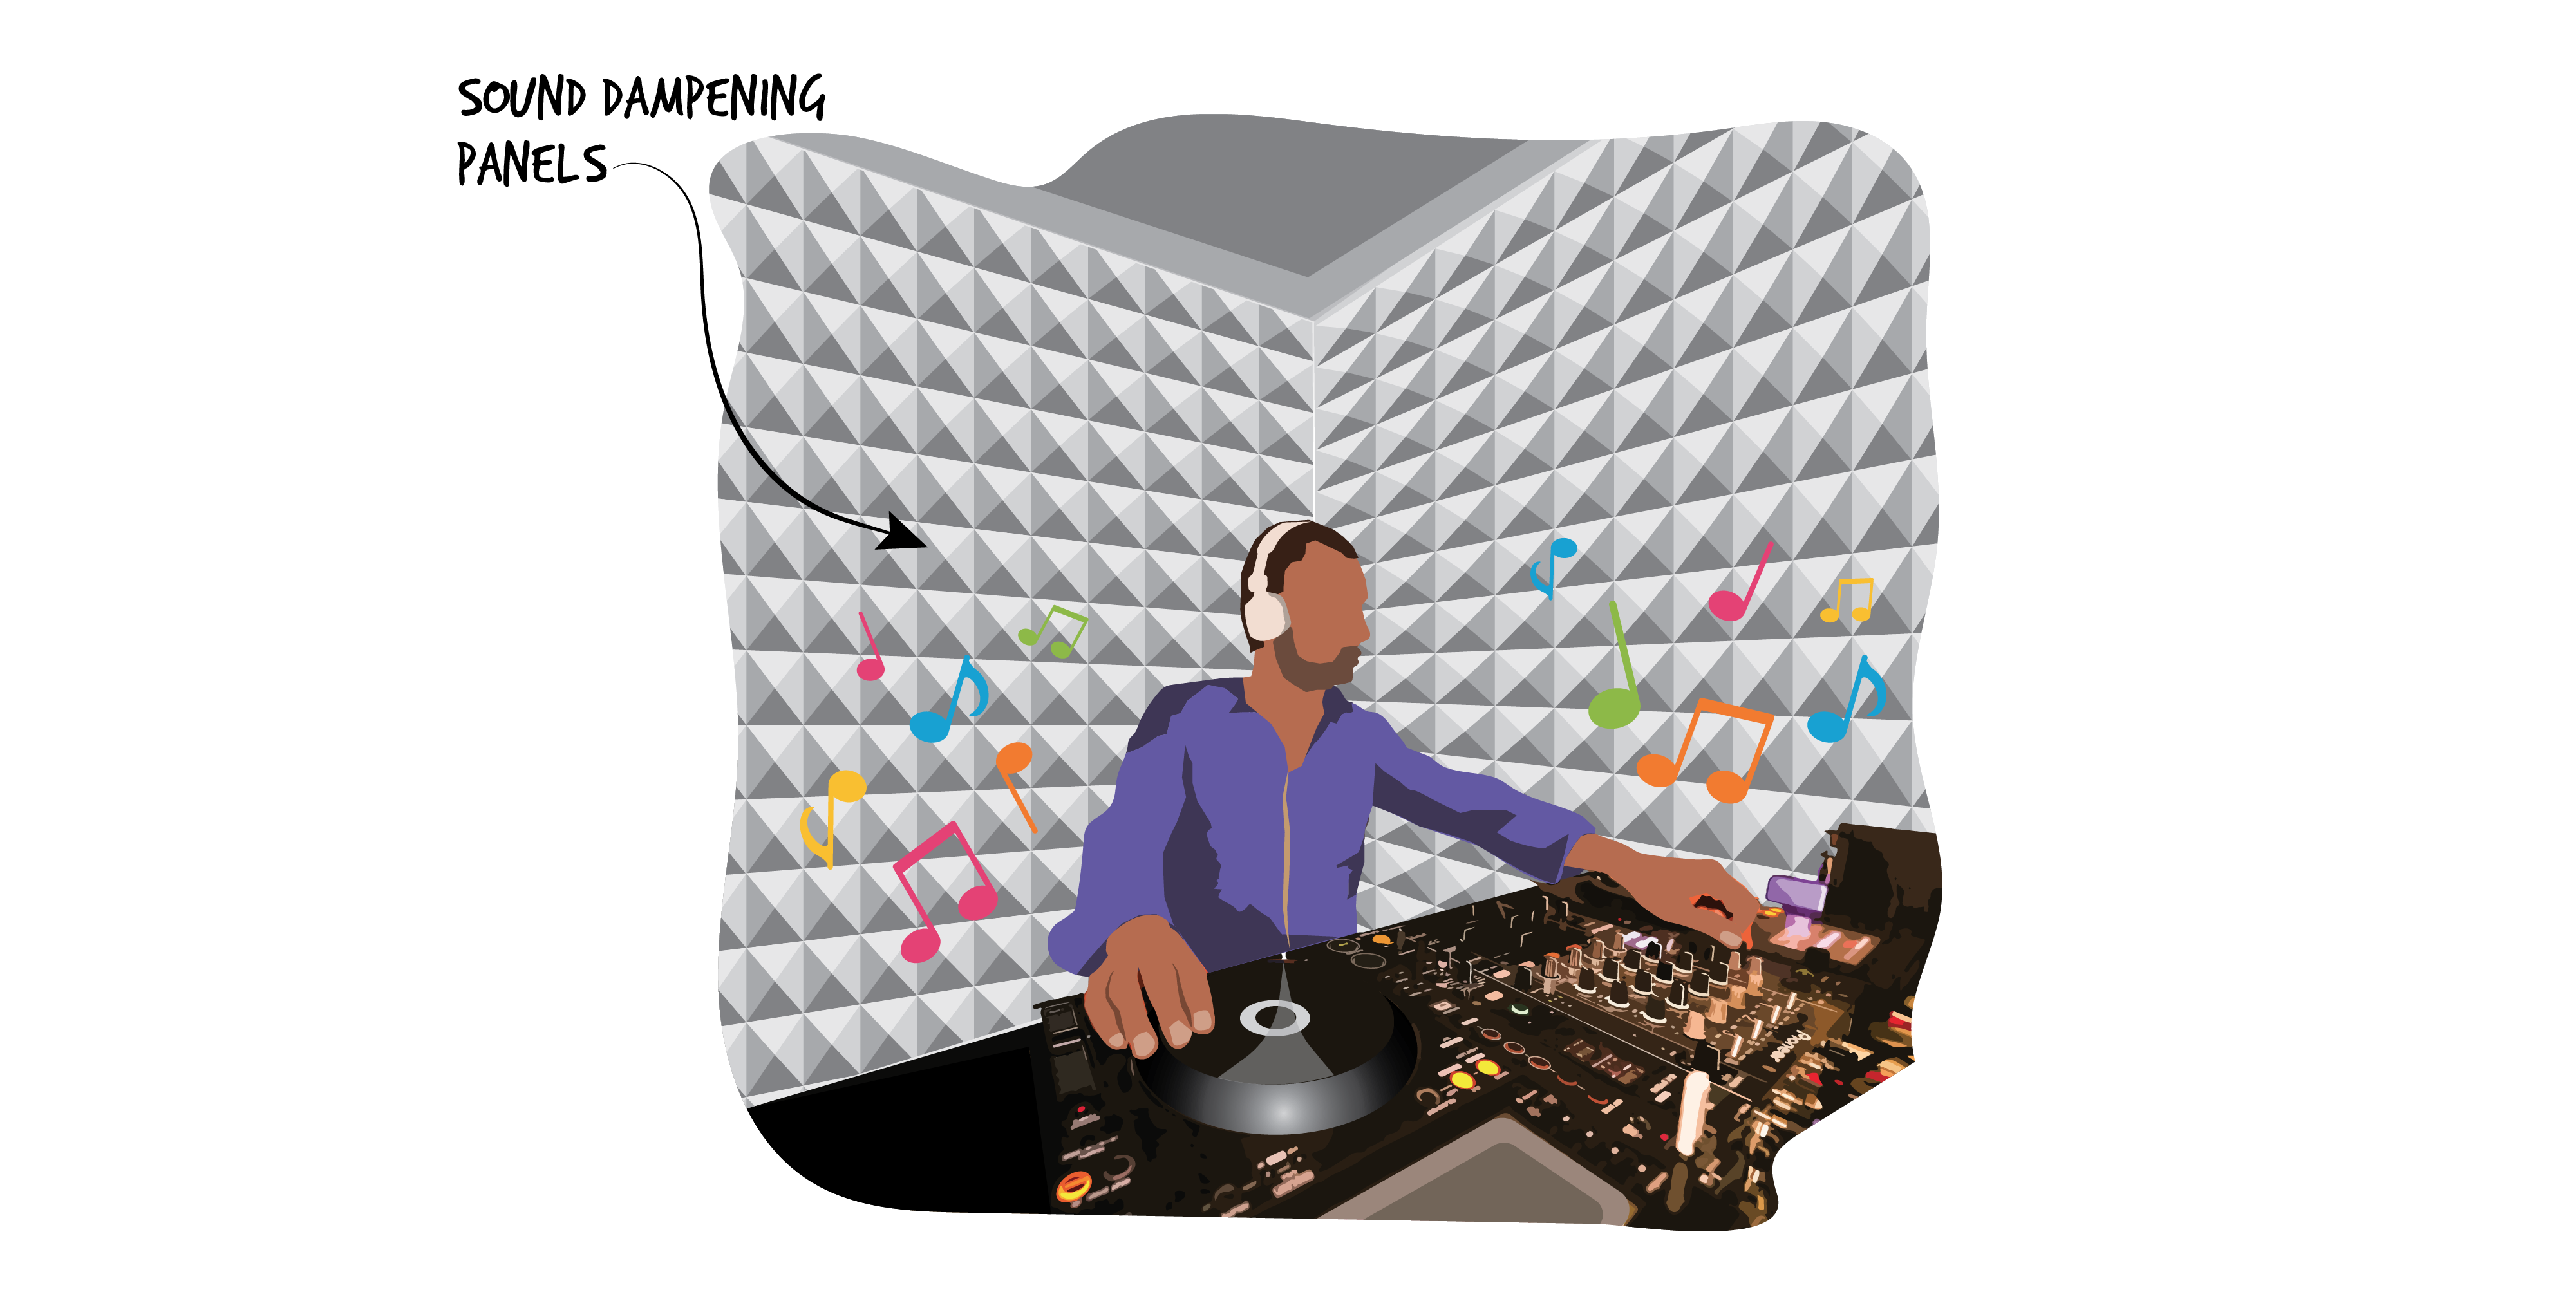 A DJ in a purple vest works in a grey paneled room. Colourful music notes surroung him. Text: Sound dampening panels.